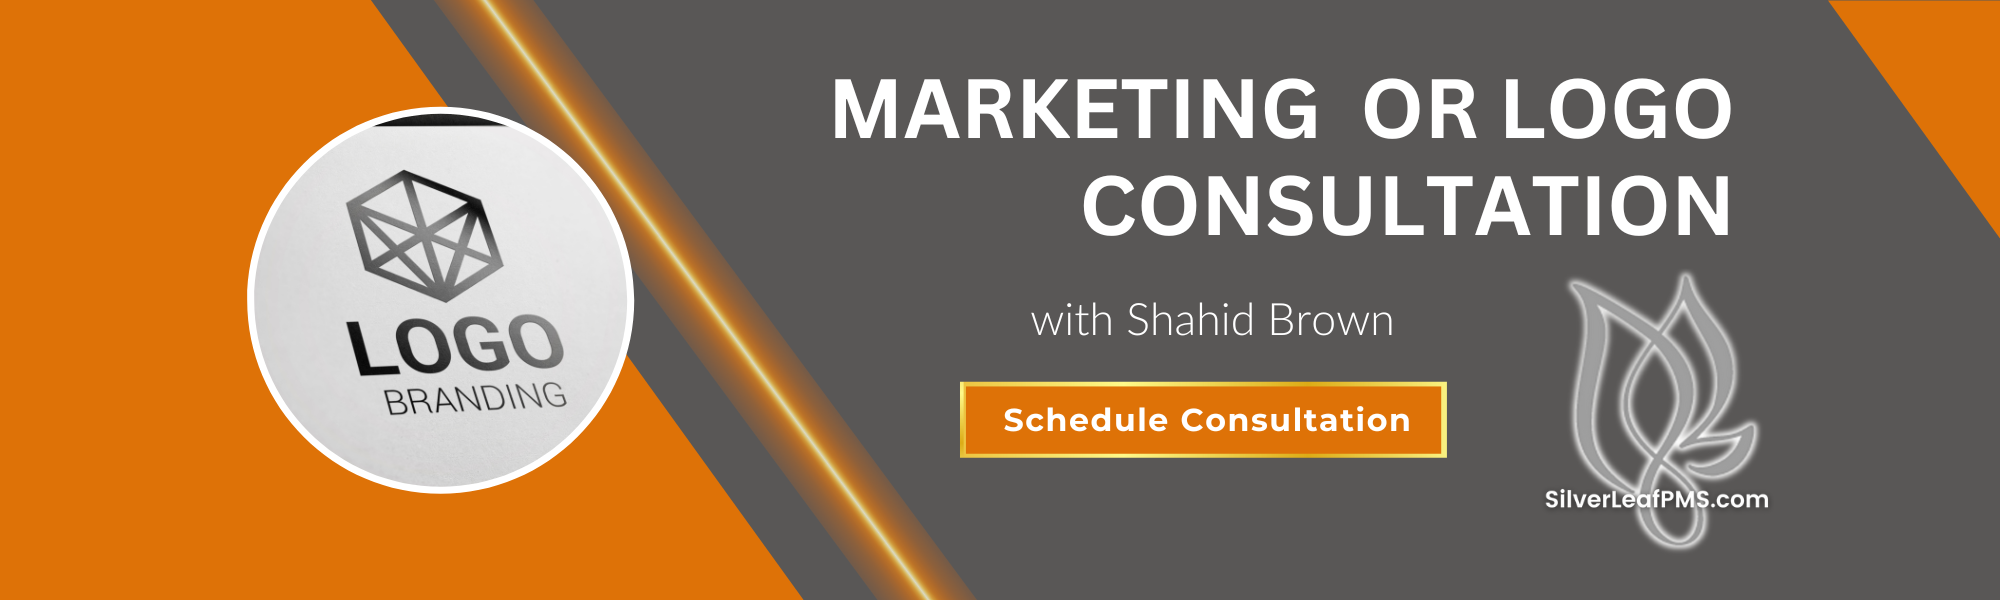 Marketing or logo consultation with Shahid Brown at SilverLeaf PMS